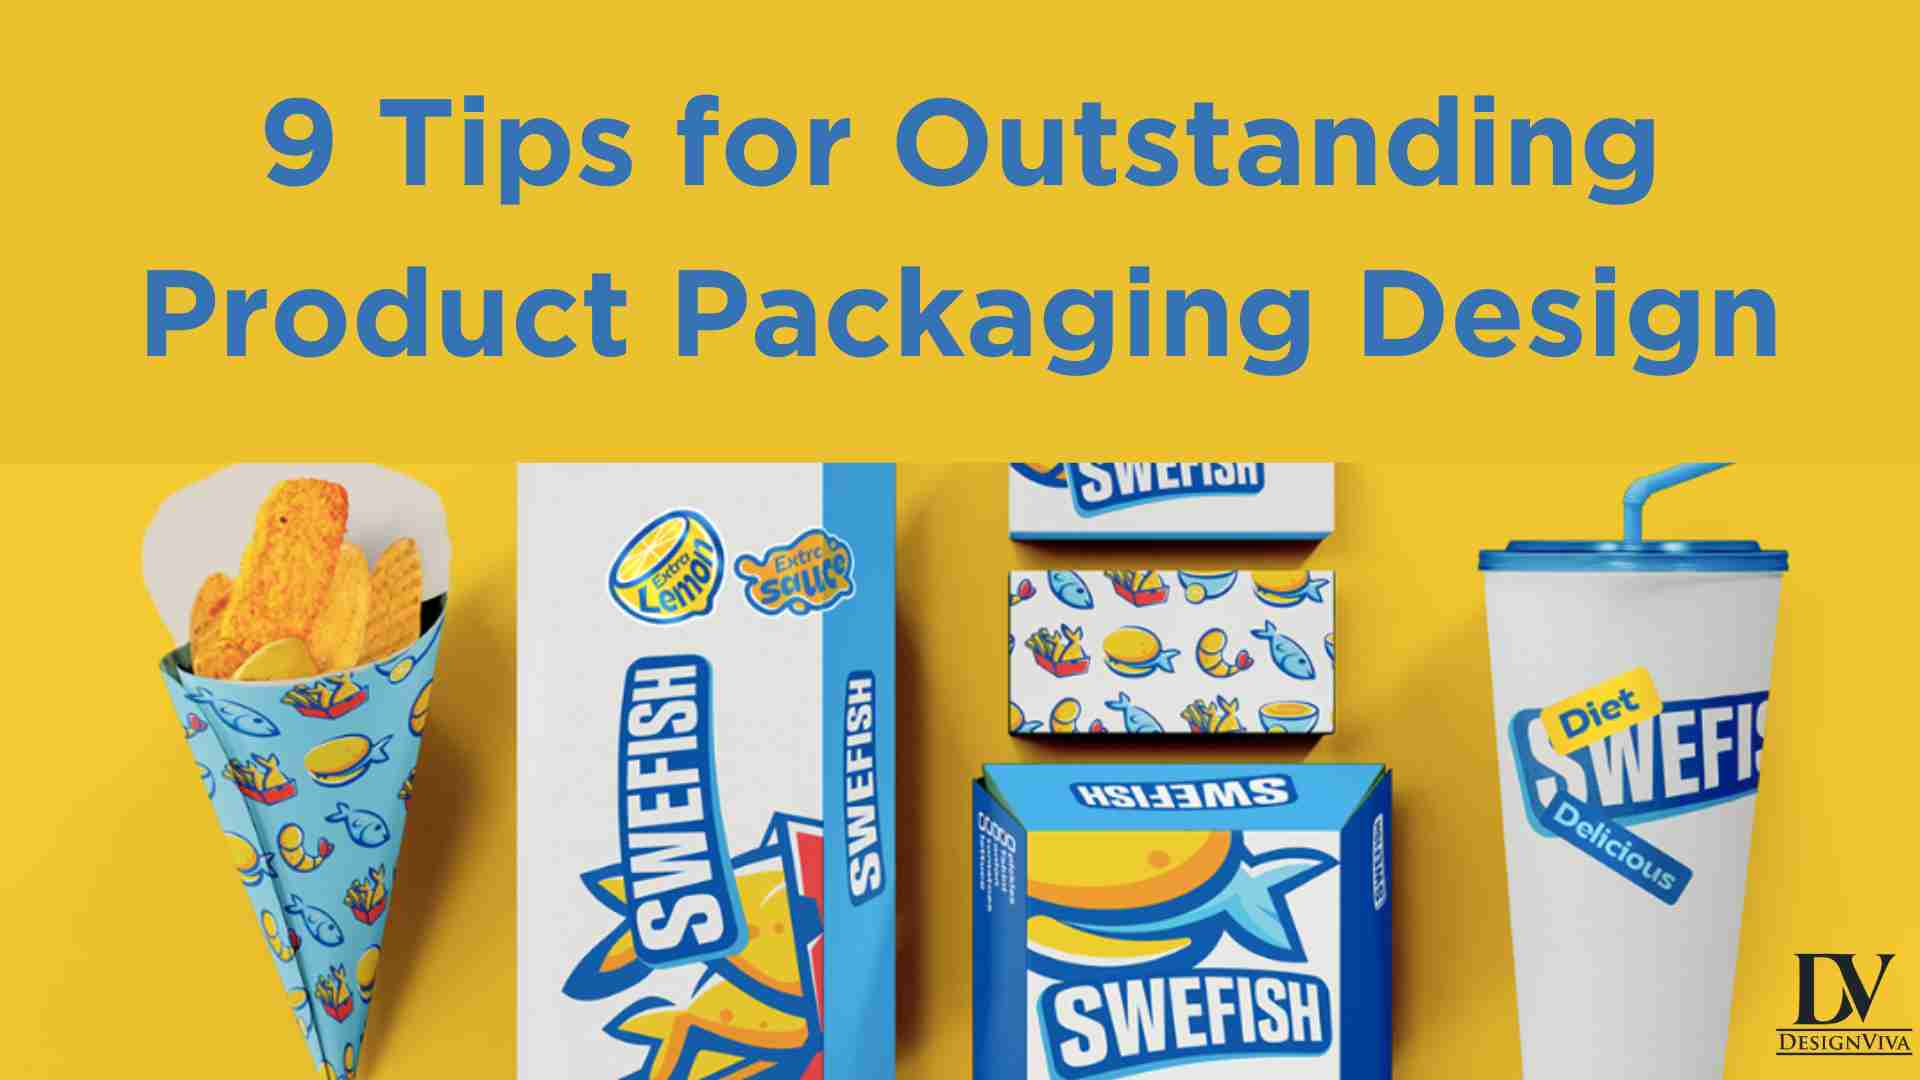 9 Tips for Outstanding Product Packaging Design